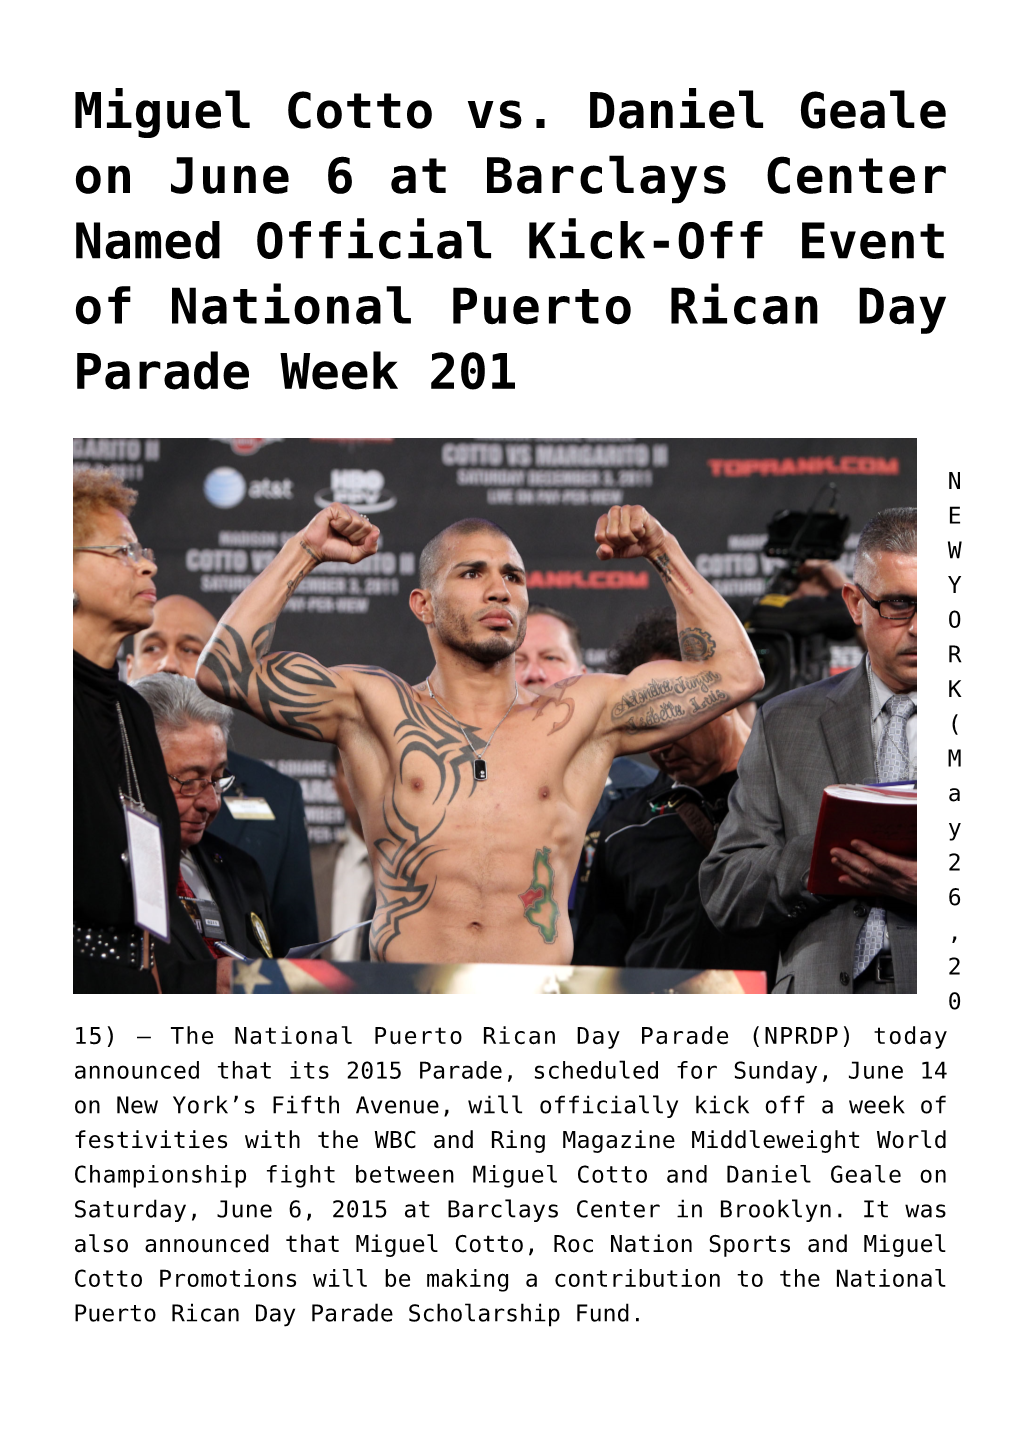 Miguel Cotto Vs. Daniel Geale on June 6 at Barclays Center Named Official Kick-Off Event of National Puerto Rican Day Parade Week 201